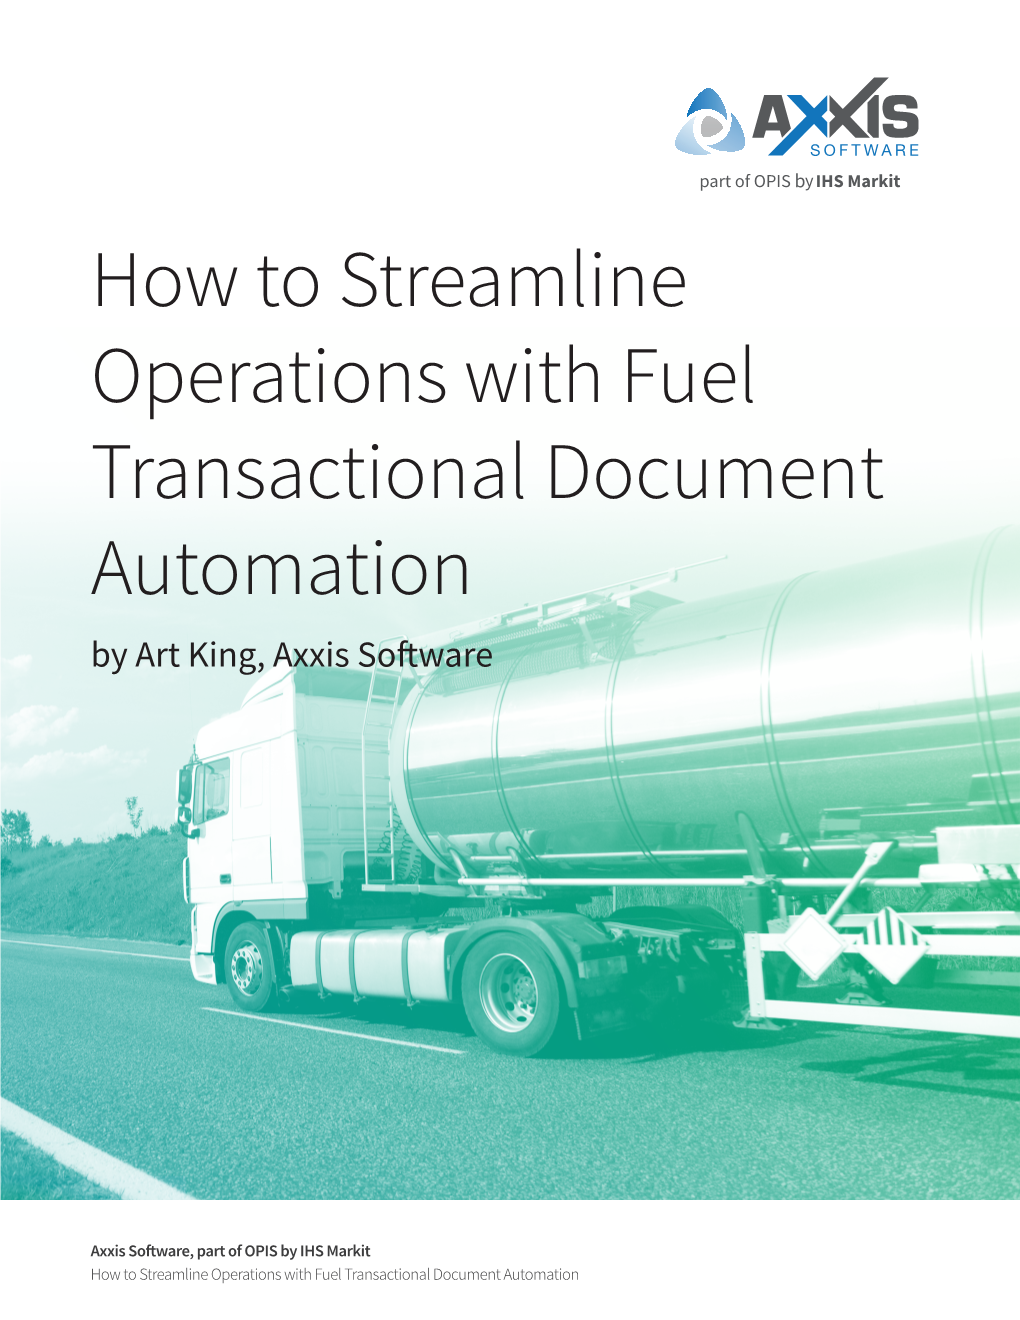 How to Streamline Operations with Fuel Transactional Document Automation by Art King, Axxis Software